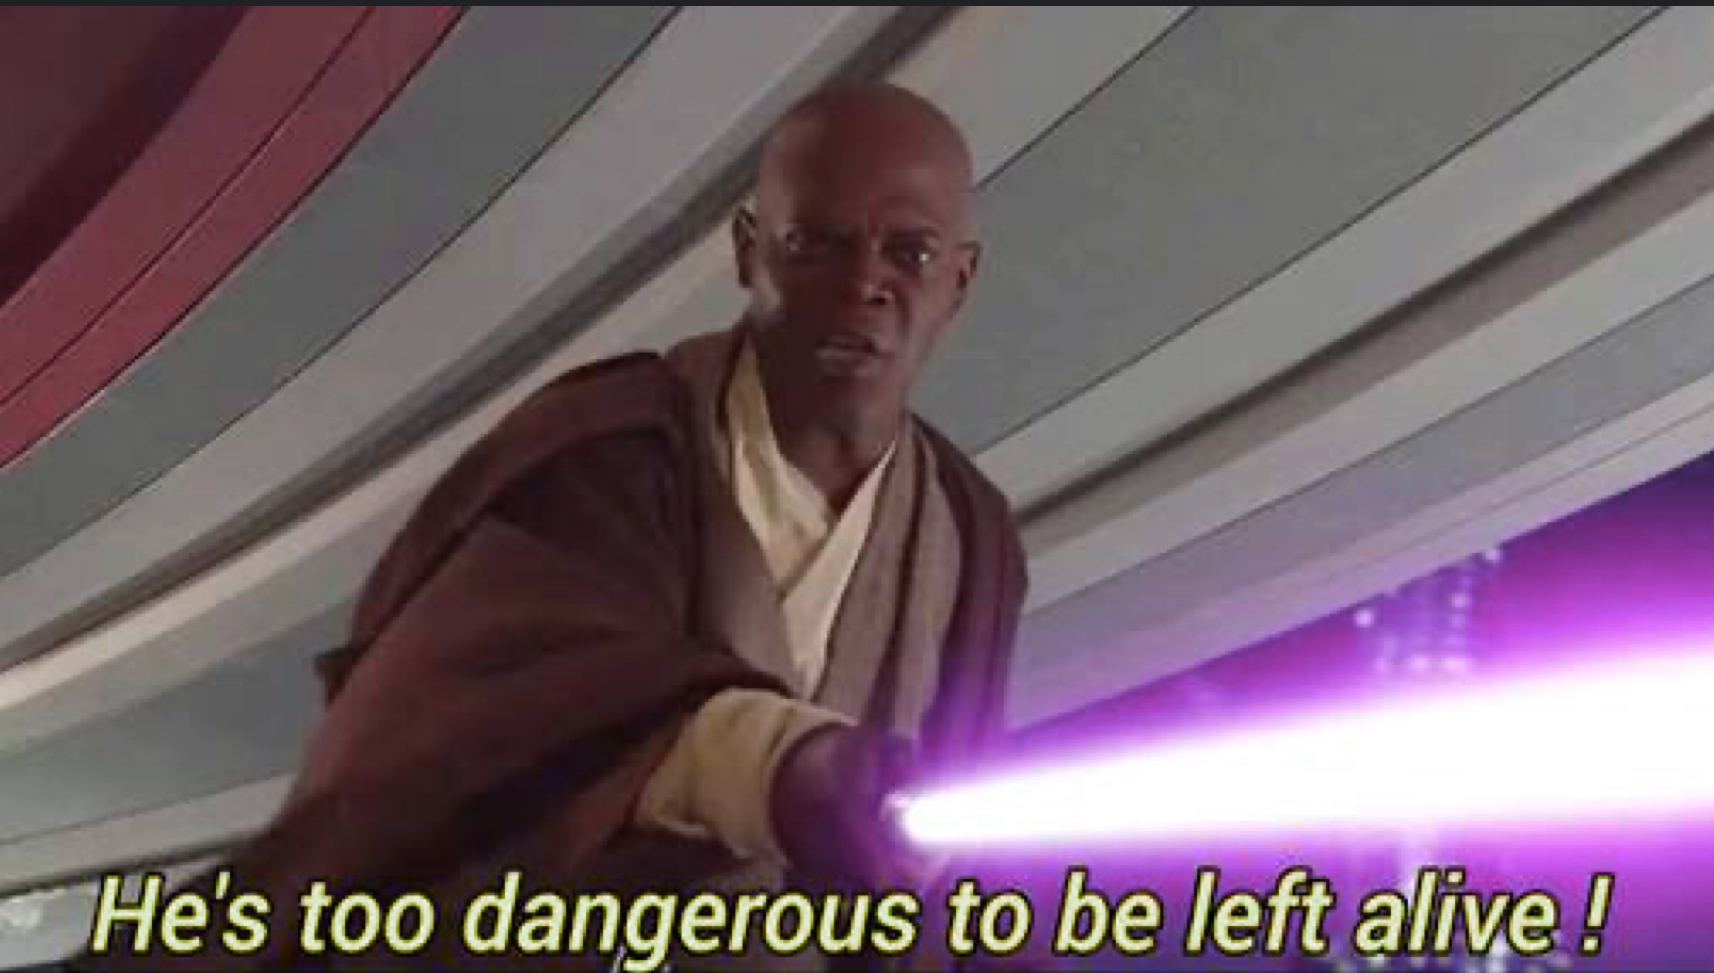 He’s too dangerous to be left alive! Blank Meme Template